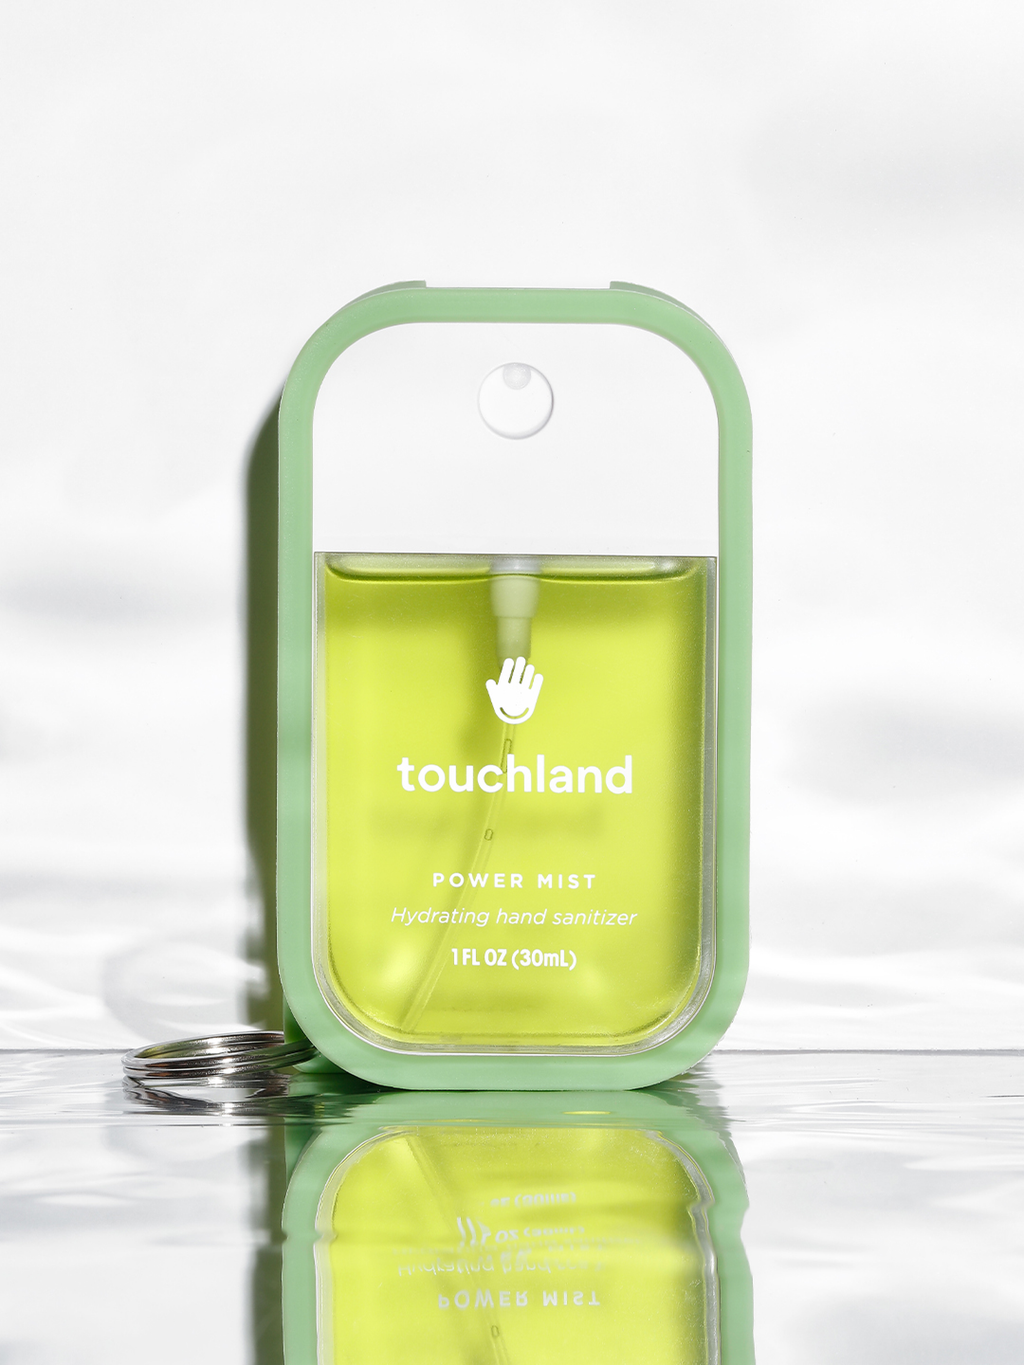 Touchland mist case green in white packaging on white background#skip